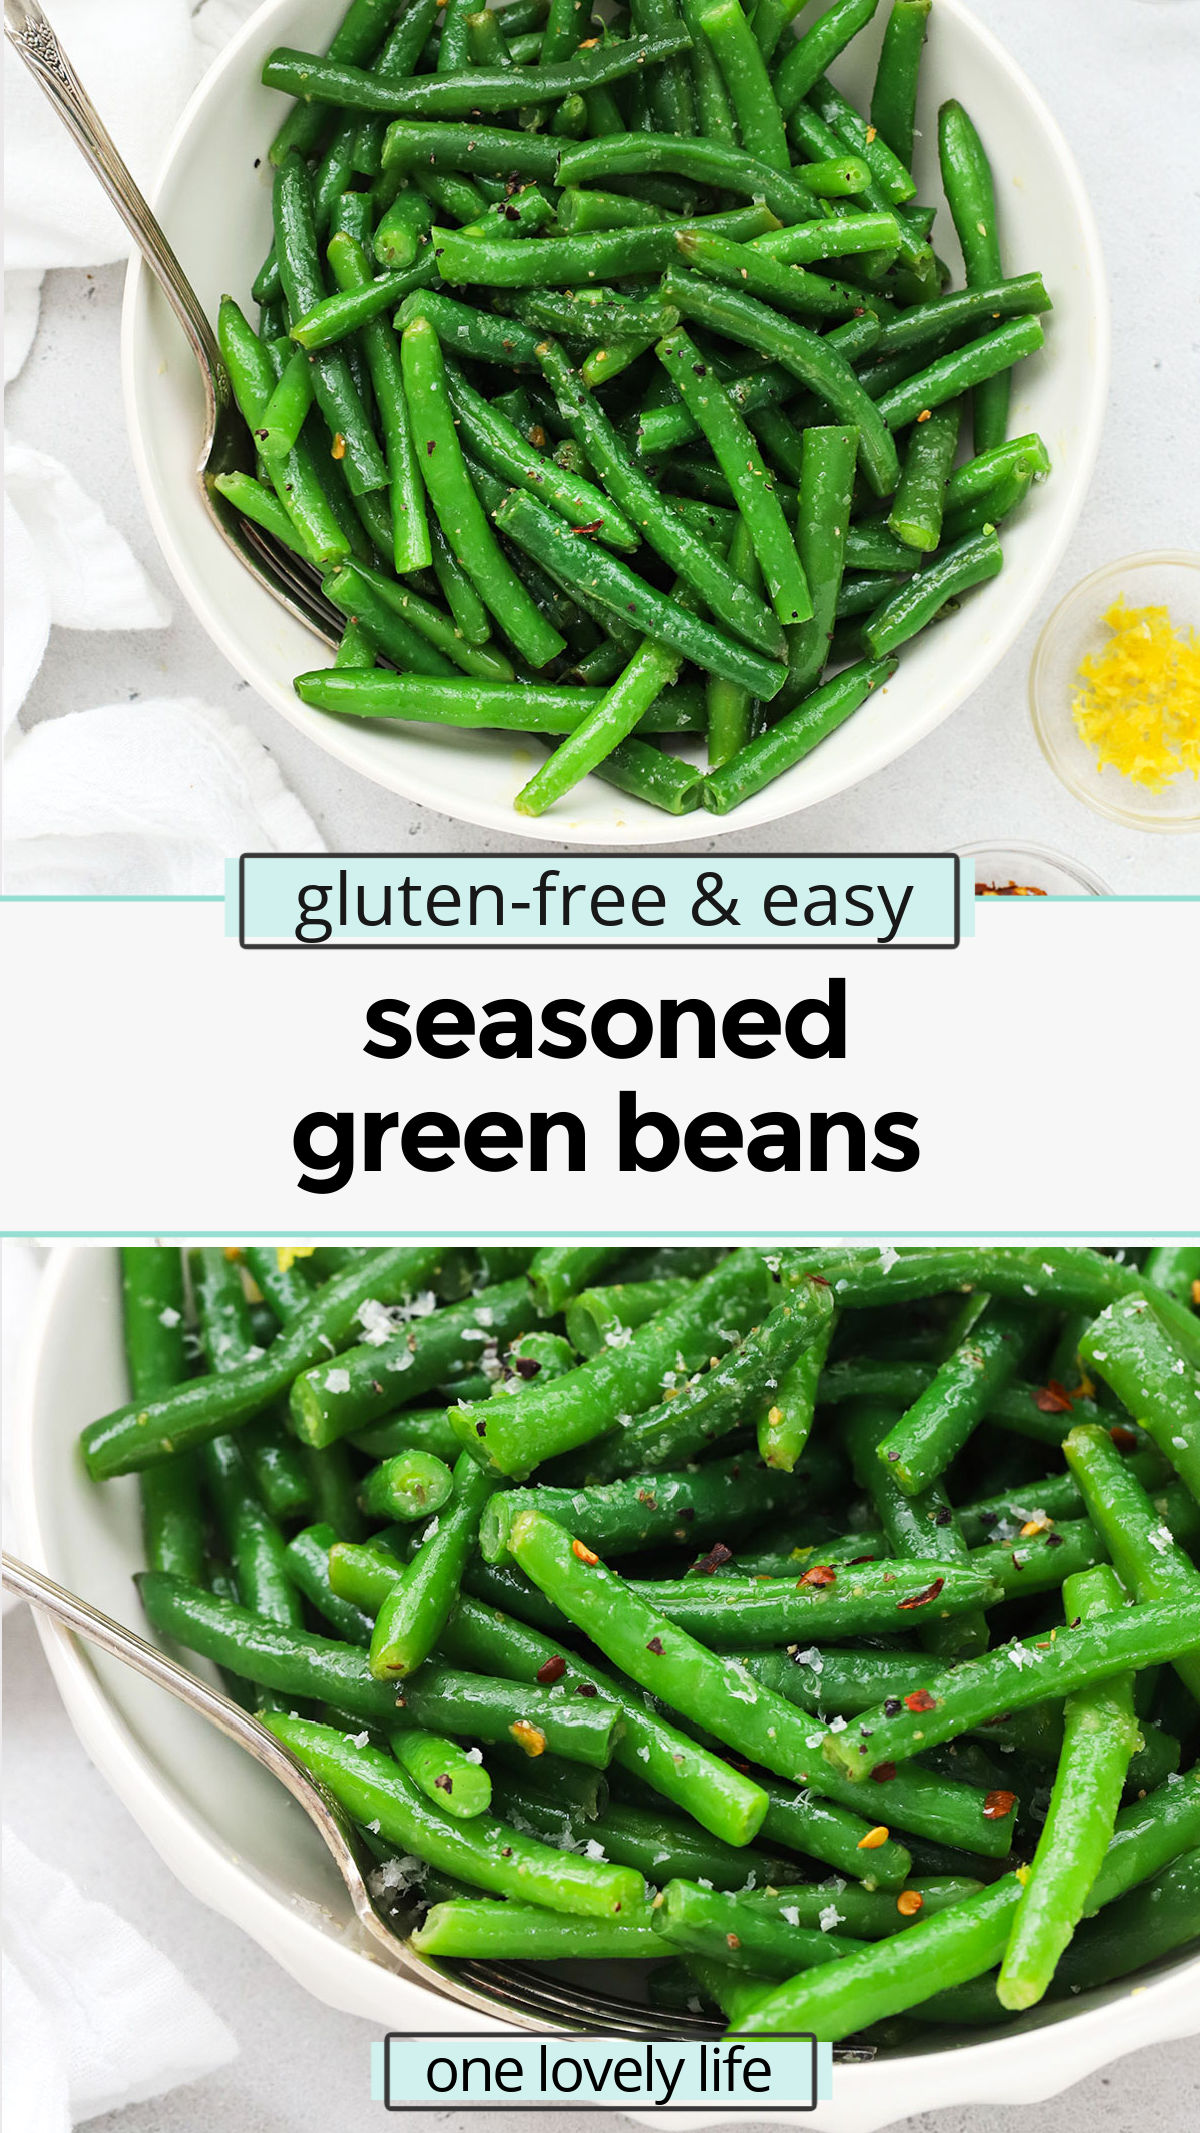 This easy seasoned green beans recipe is made from simple ingredients that pack in BIG flavor. You'll love this easy green bean seasoning! // seasoning for green beans / seasoning for frozen green beans / seasoning for canned green beans / how to season green beans / green beans side dish / seasoned green beans without bacon / green bean recipe / vegetable side dish / gluten-free side dishes / gluten-free thanksgiving recipes / gluten-free Easter recipes